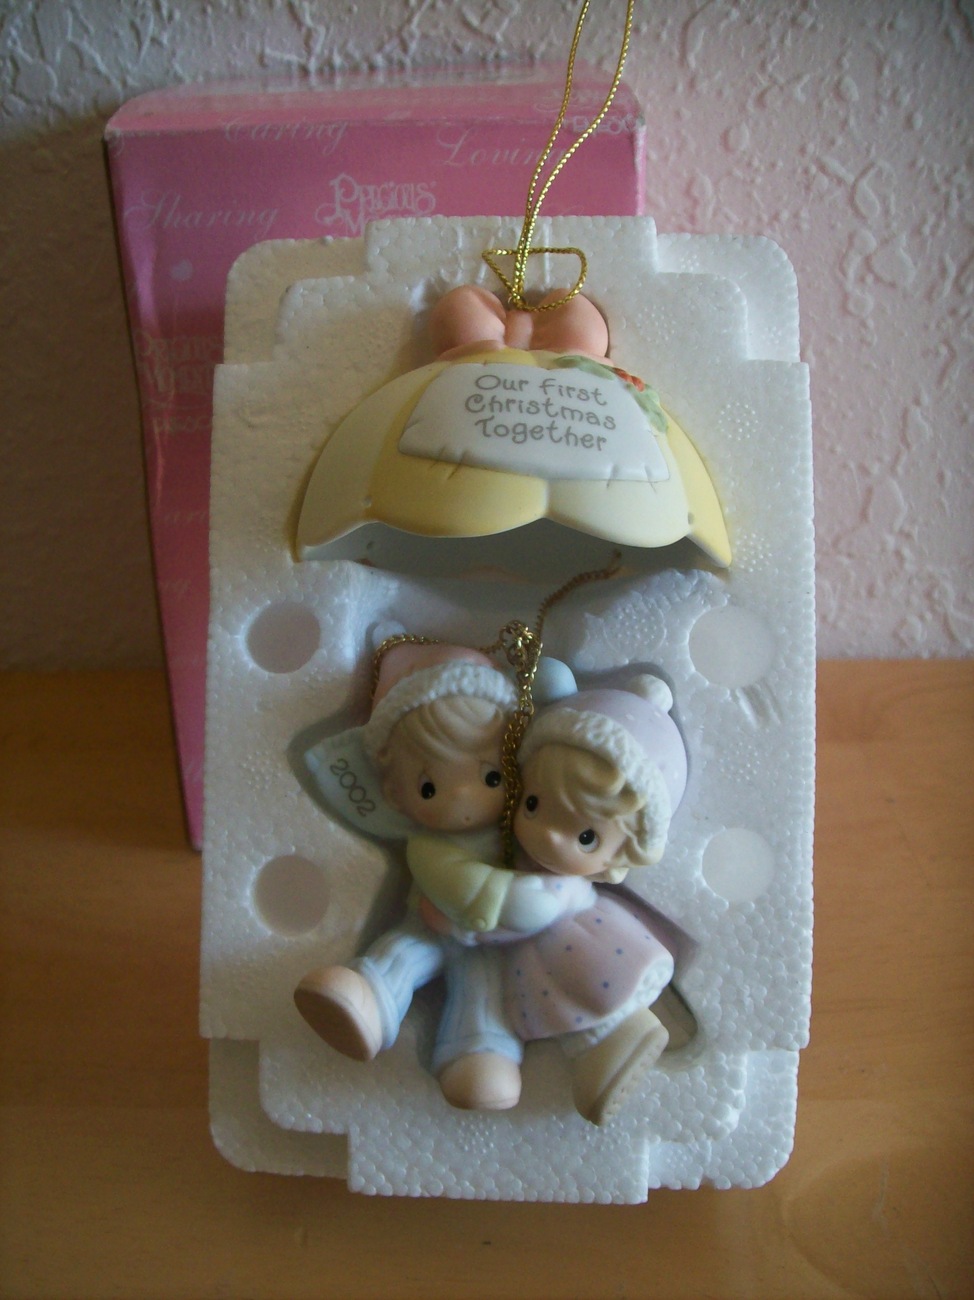 2002 Precious Moments “Our First Christmas Together” Figurine  - $25.00